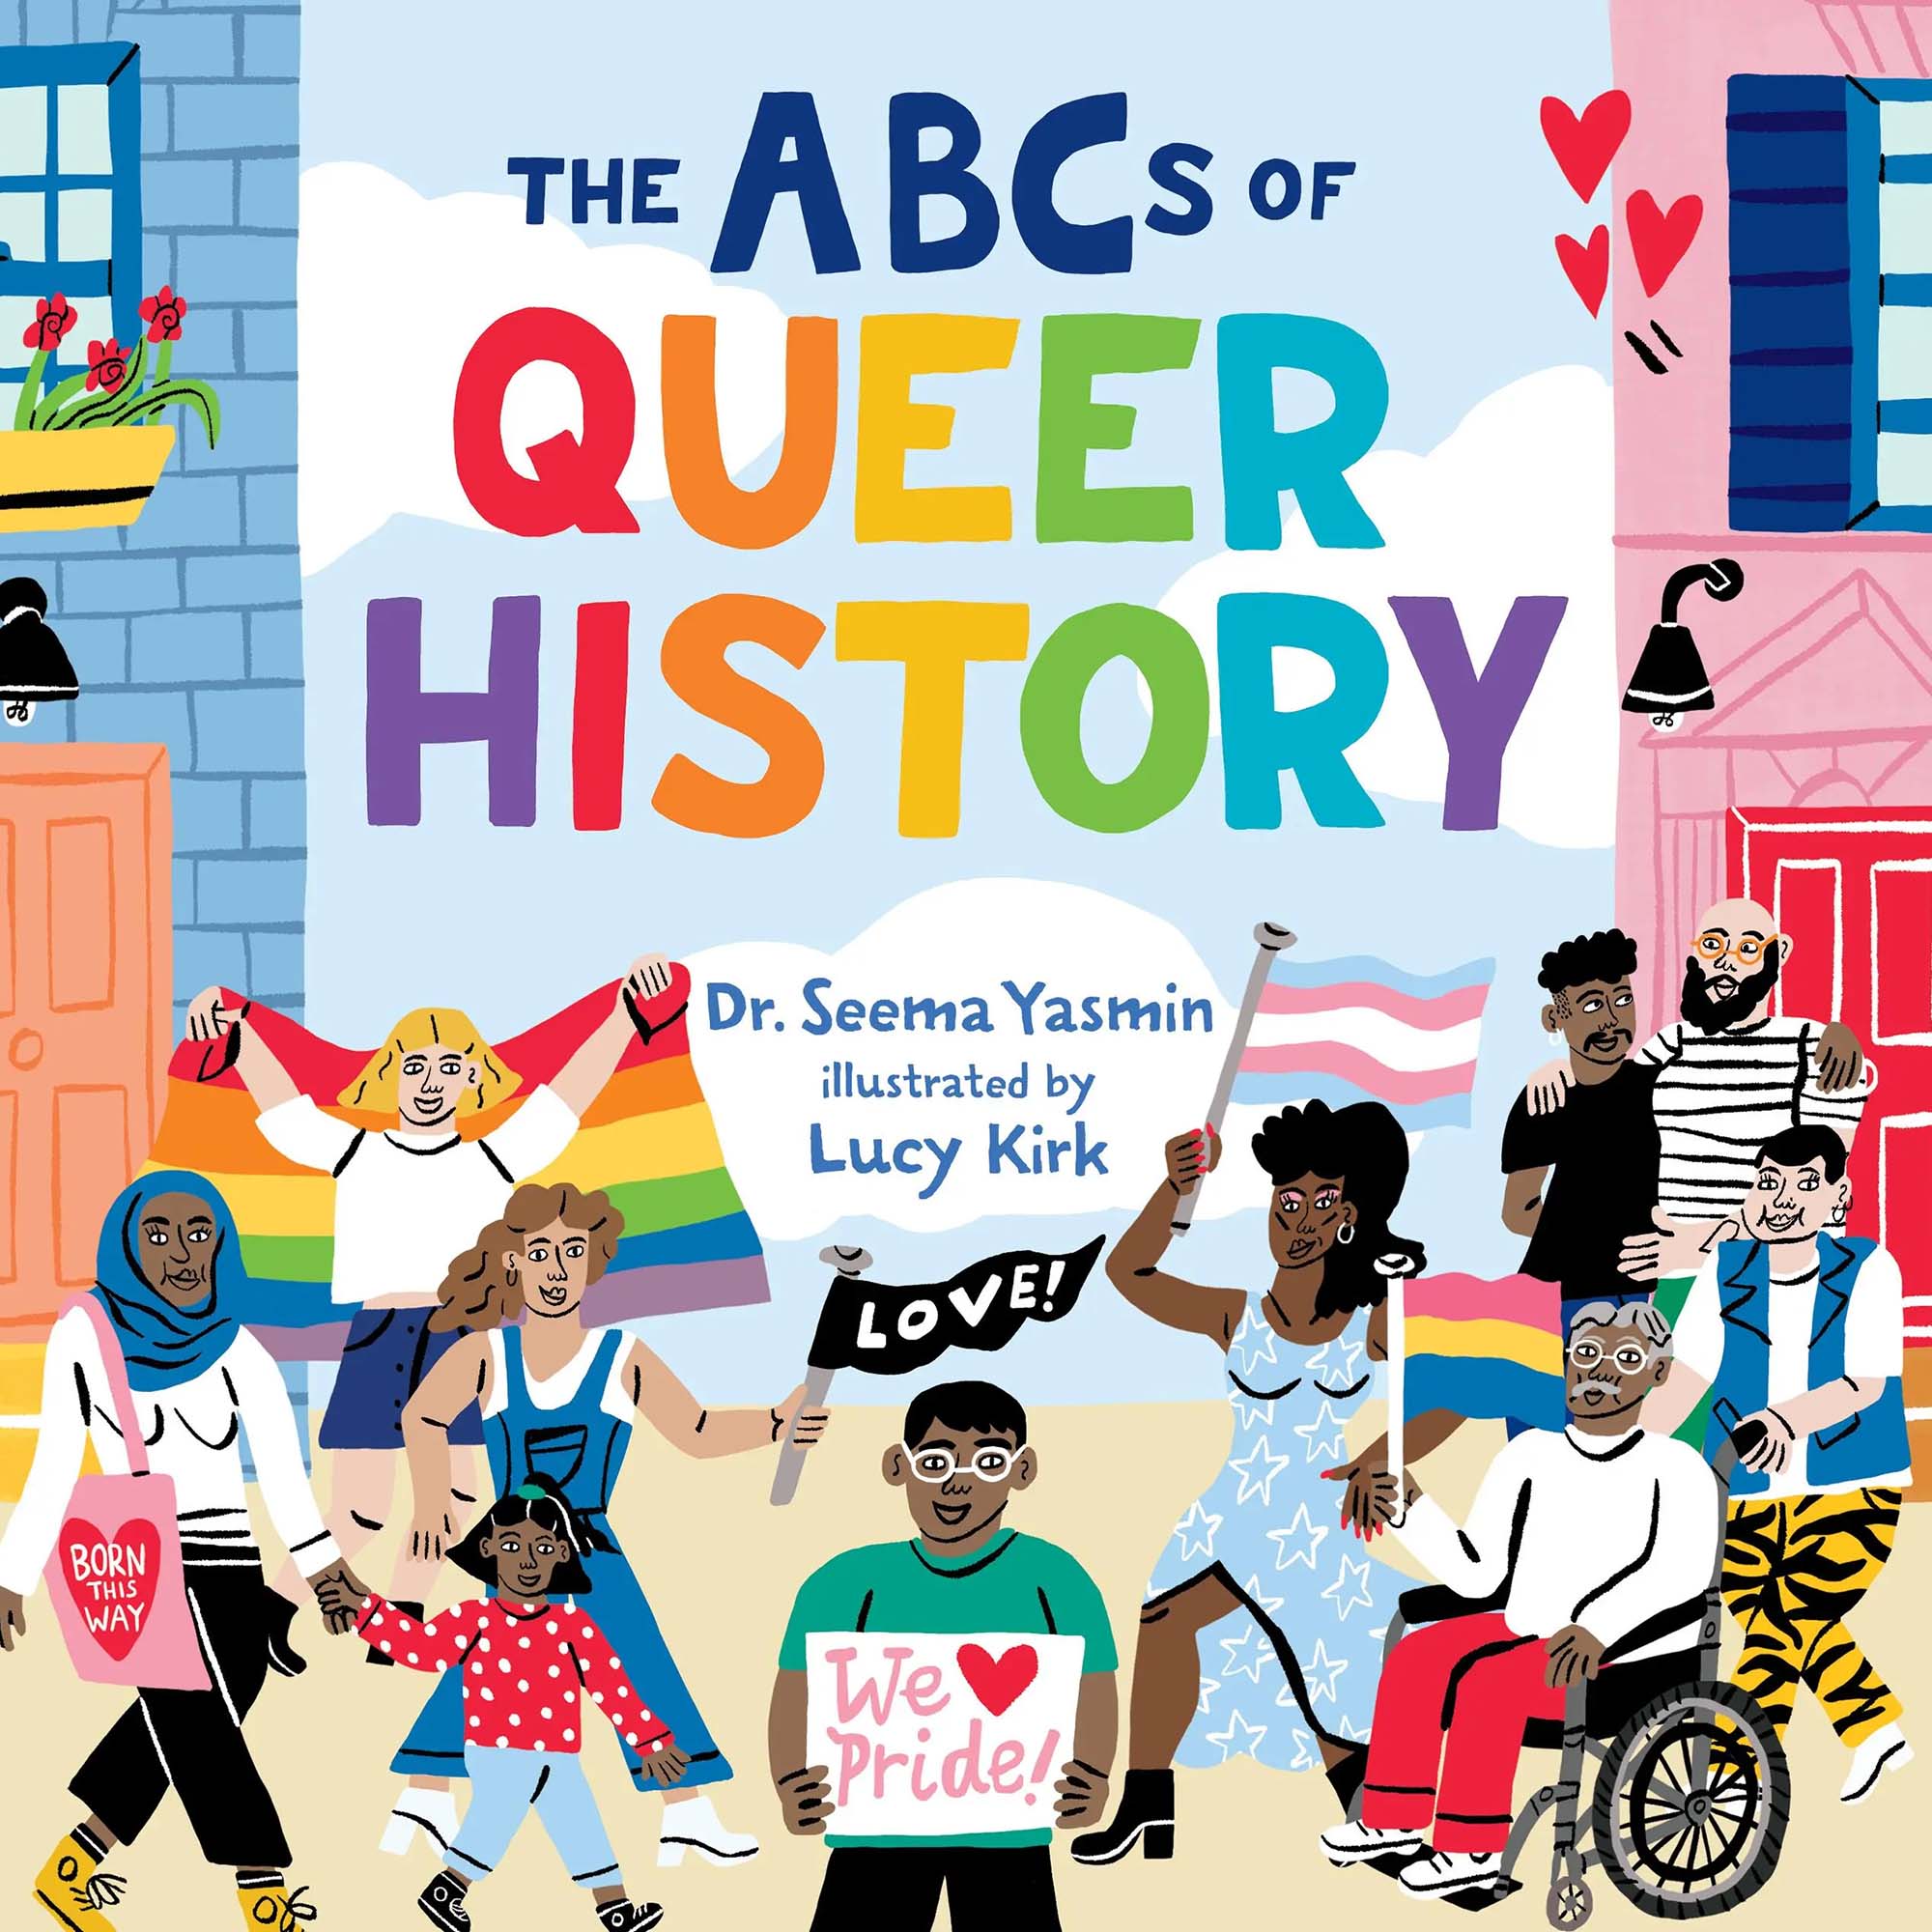 Photo: Cover of the book "The ABCs of Queer History." It features colorful illustrations of a diverse group of people celebrating LGBTQIA+ Pride.